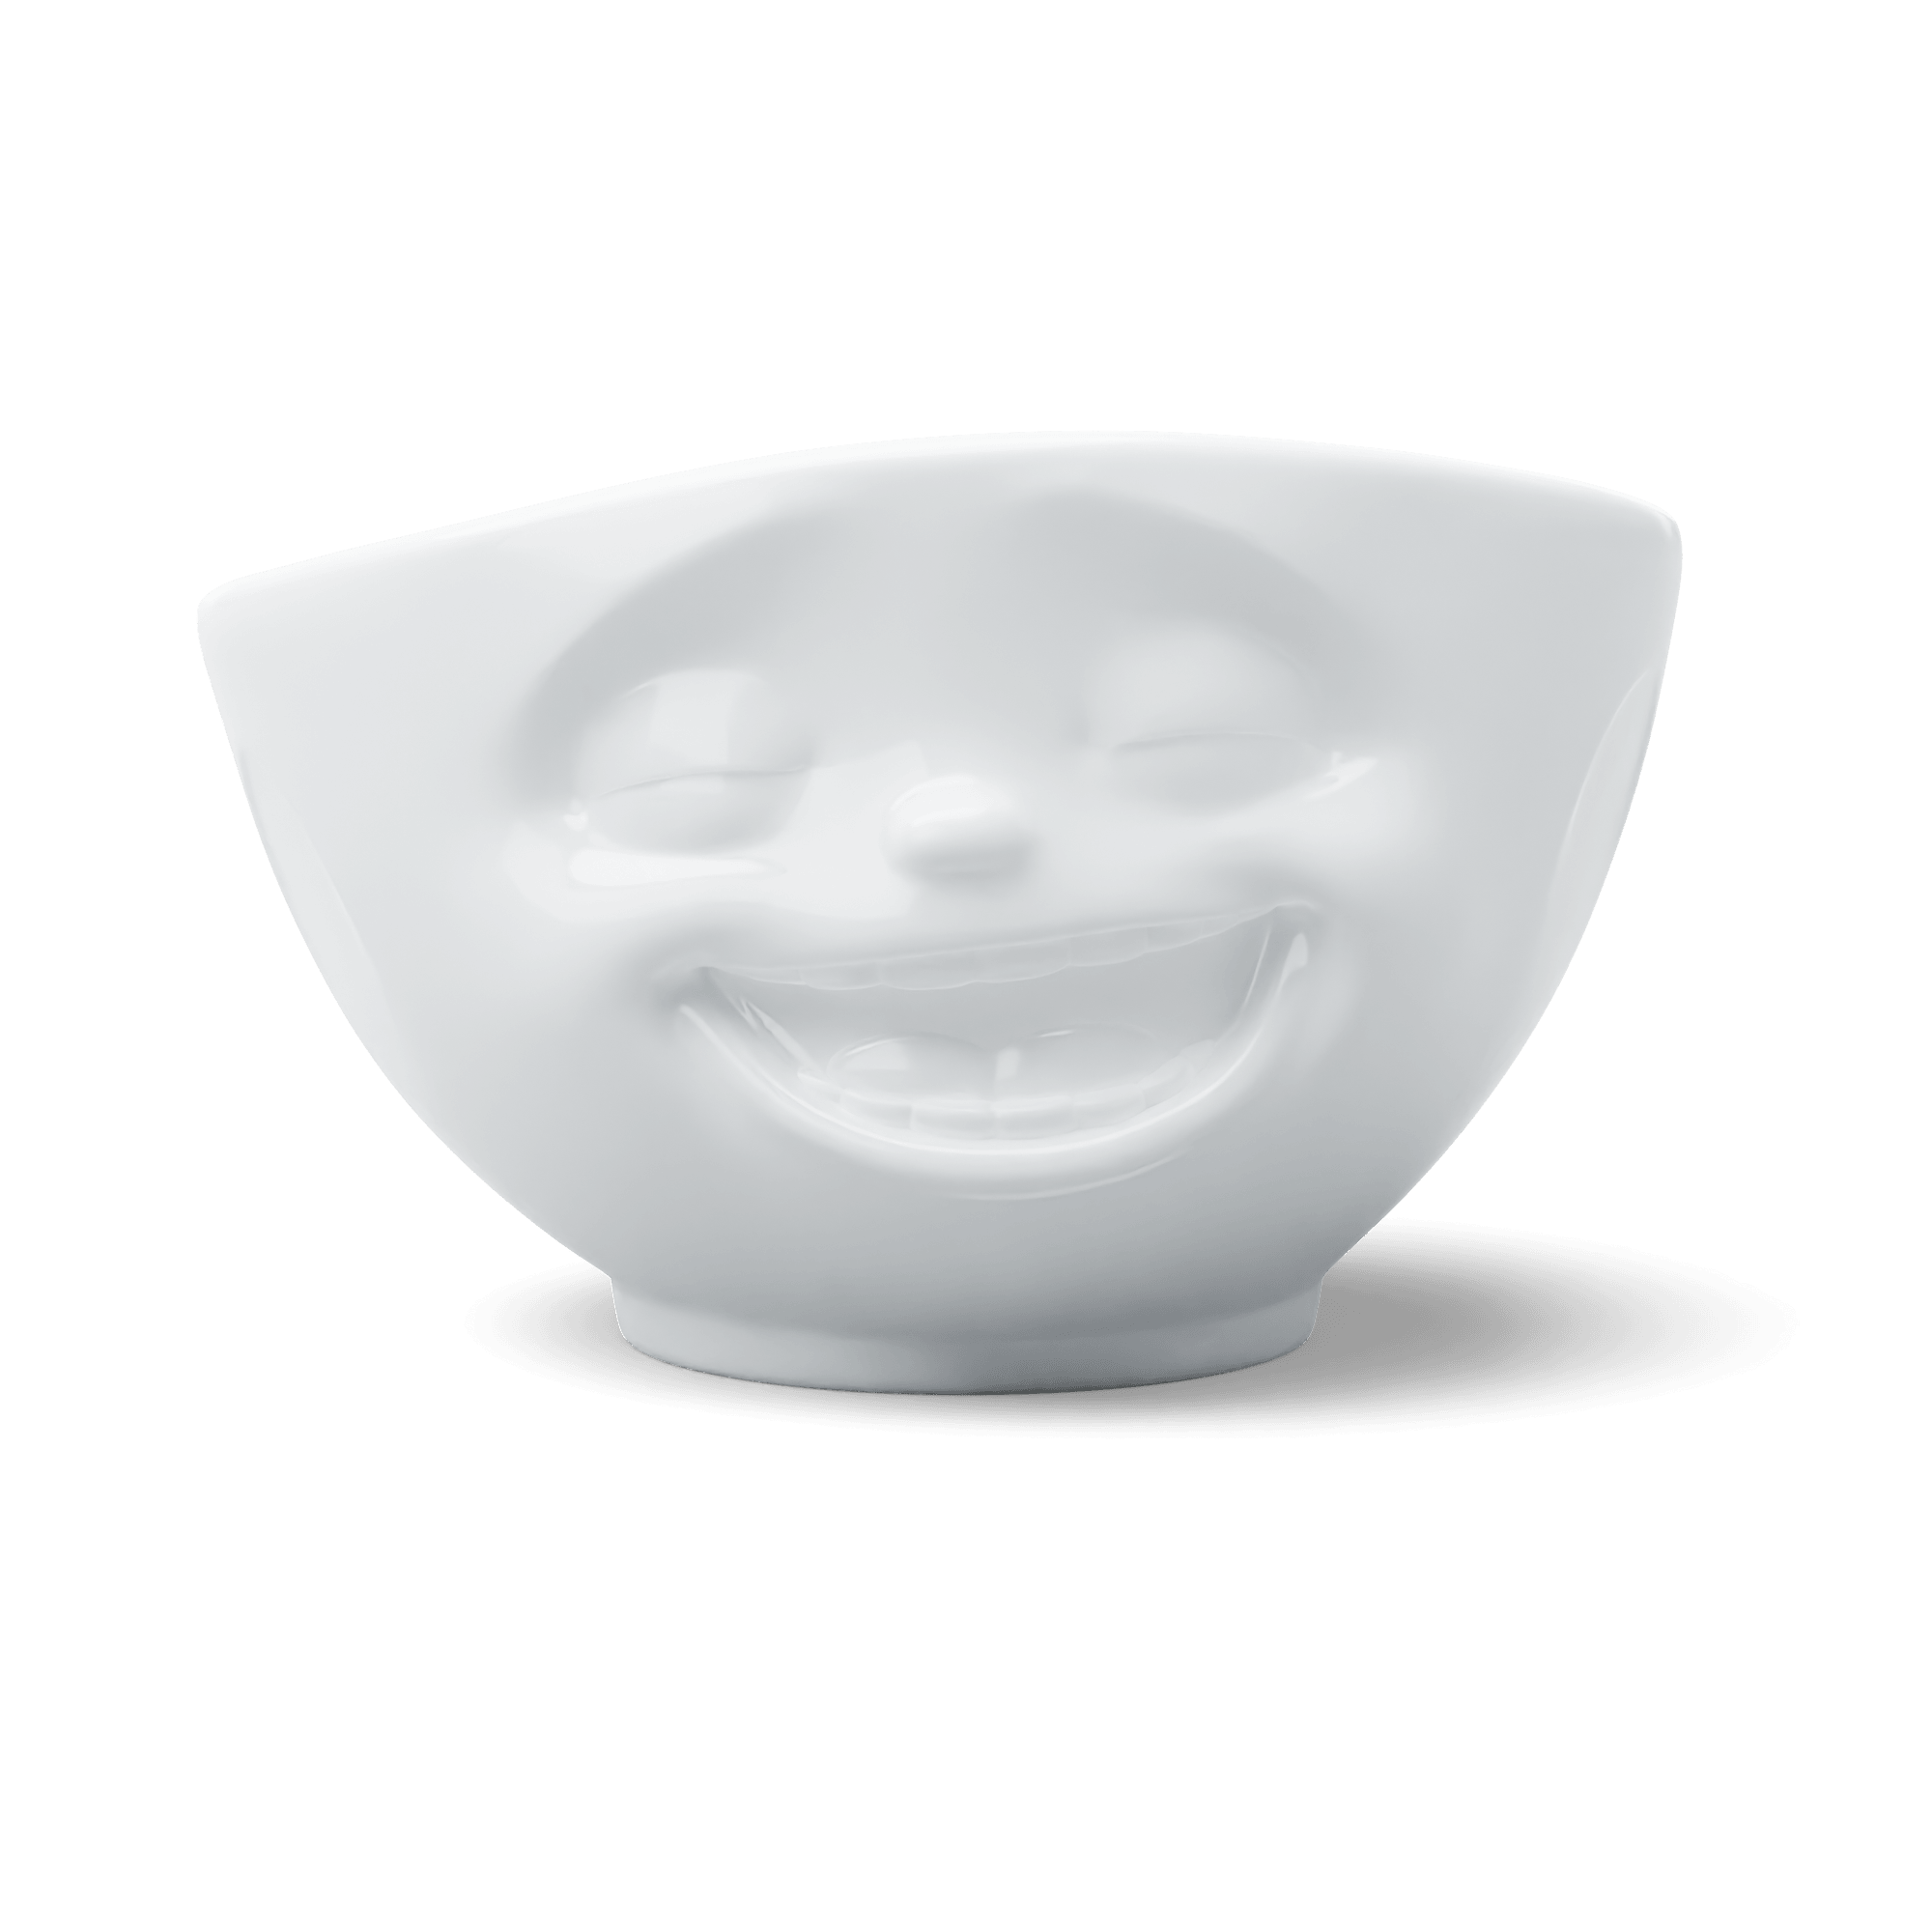 Miska LAUGHING biały 58products    Eye on Design